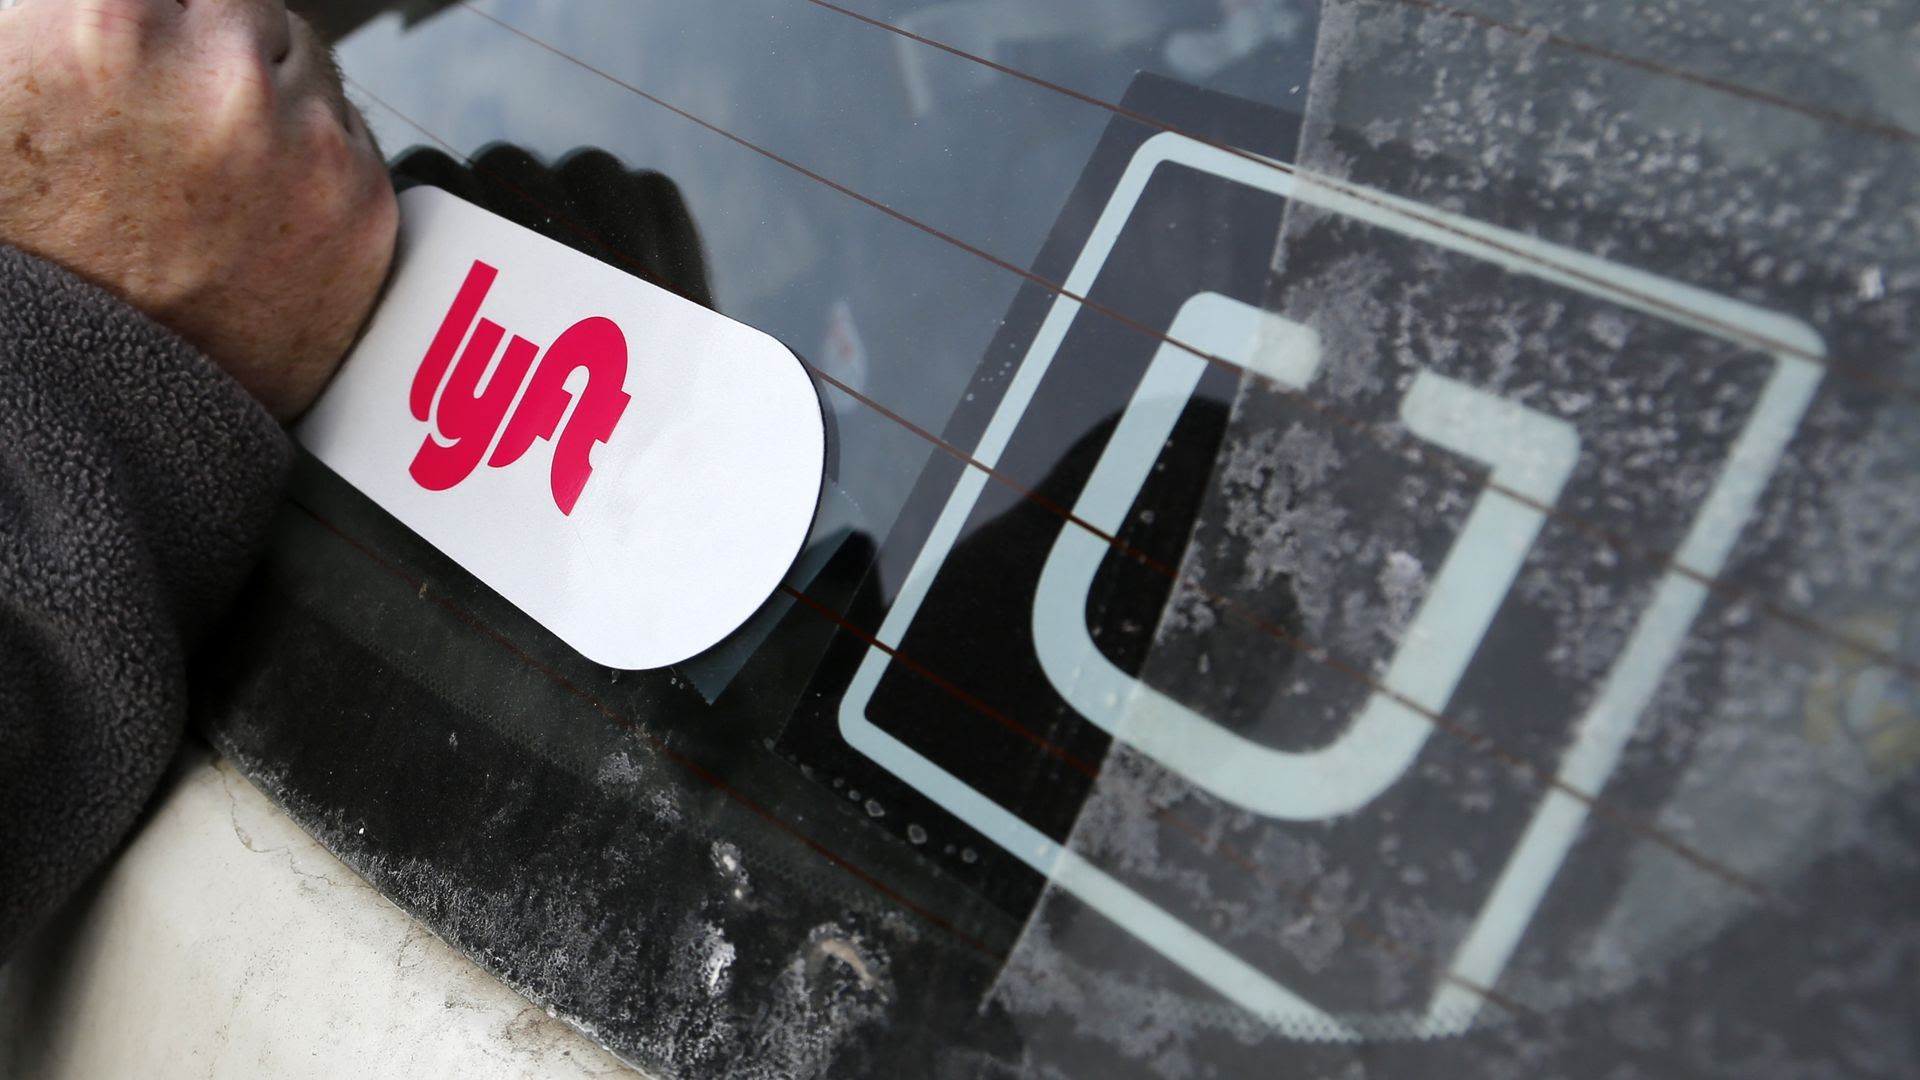 Uber and Lyft stickers on a car.